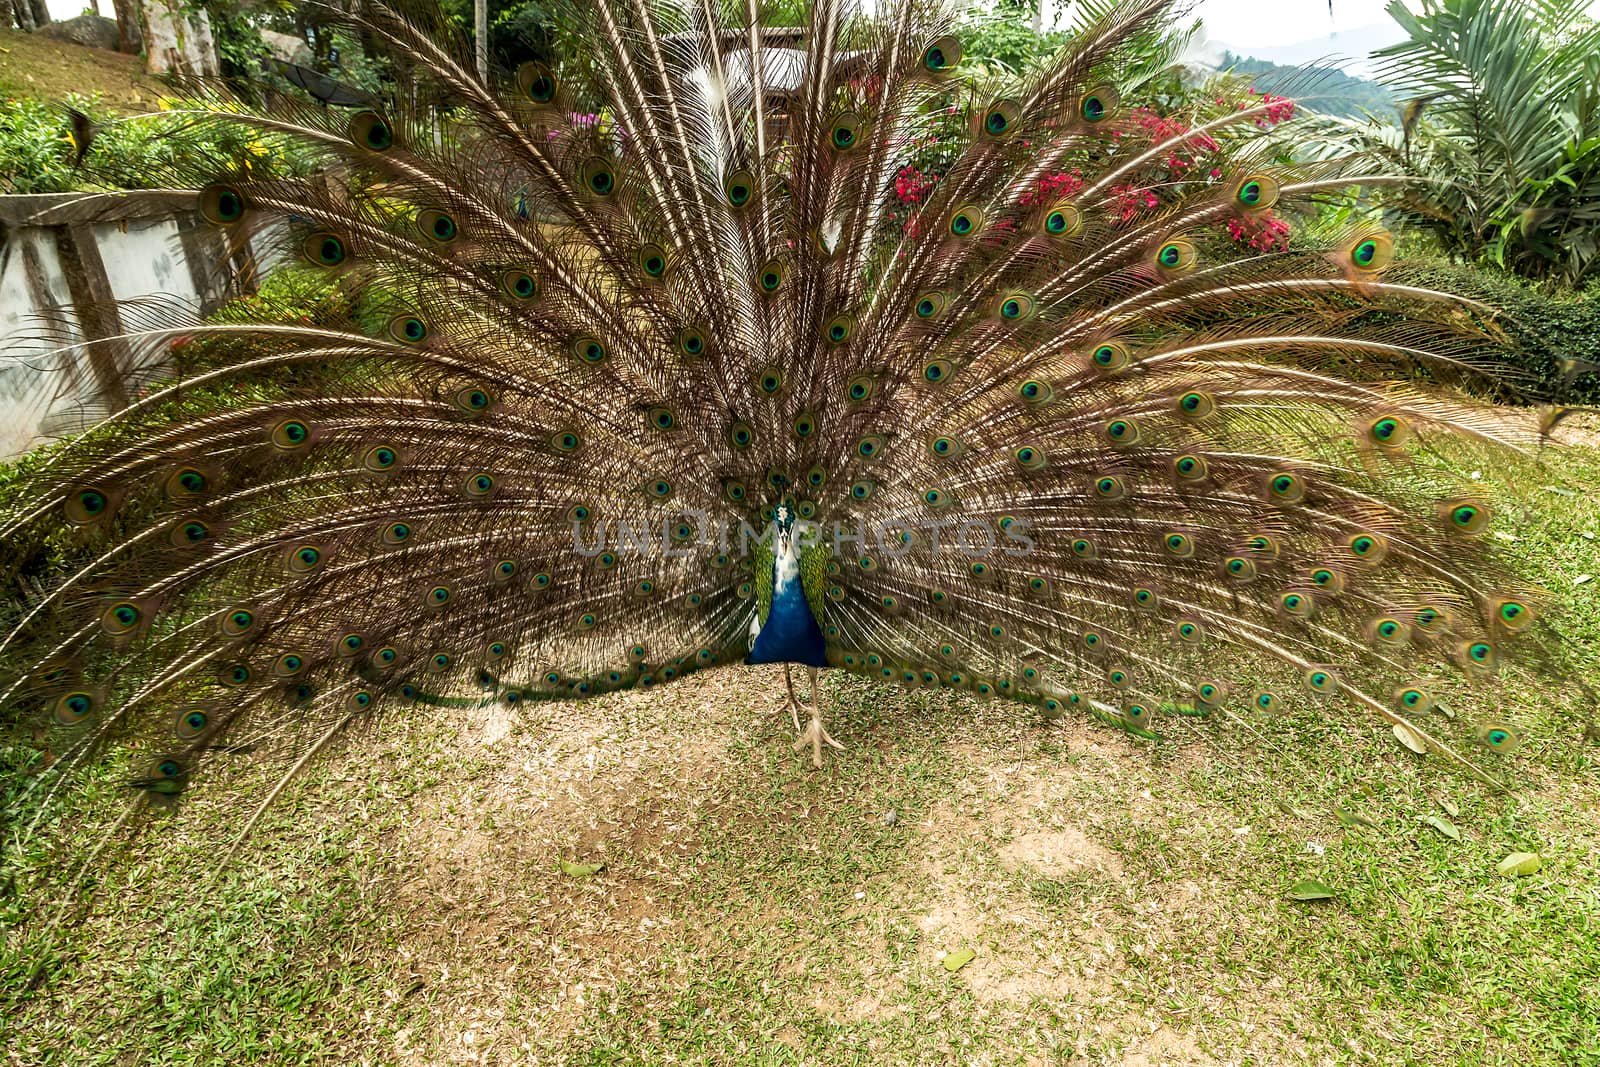 Peacock Fanned Out Feathers by Vladyslav